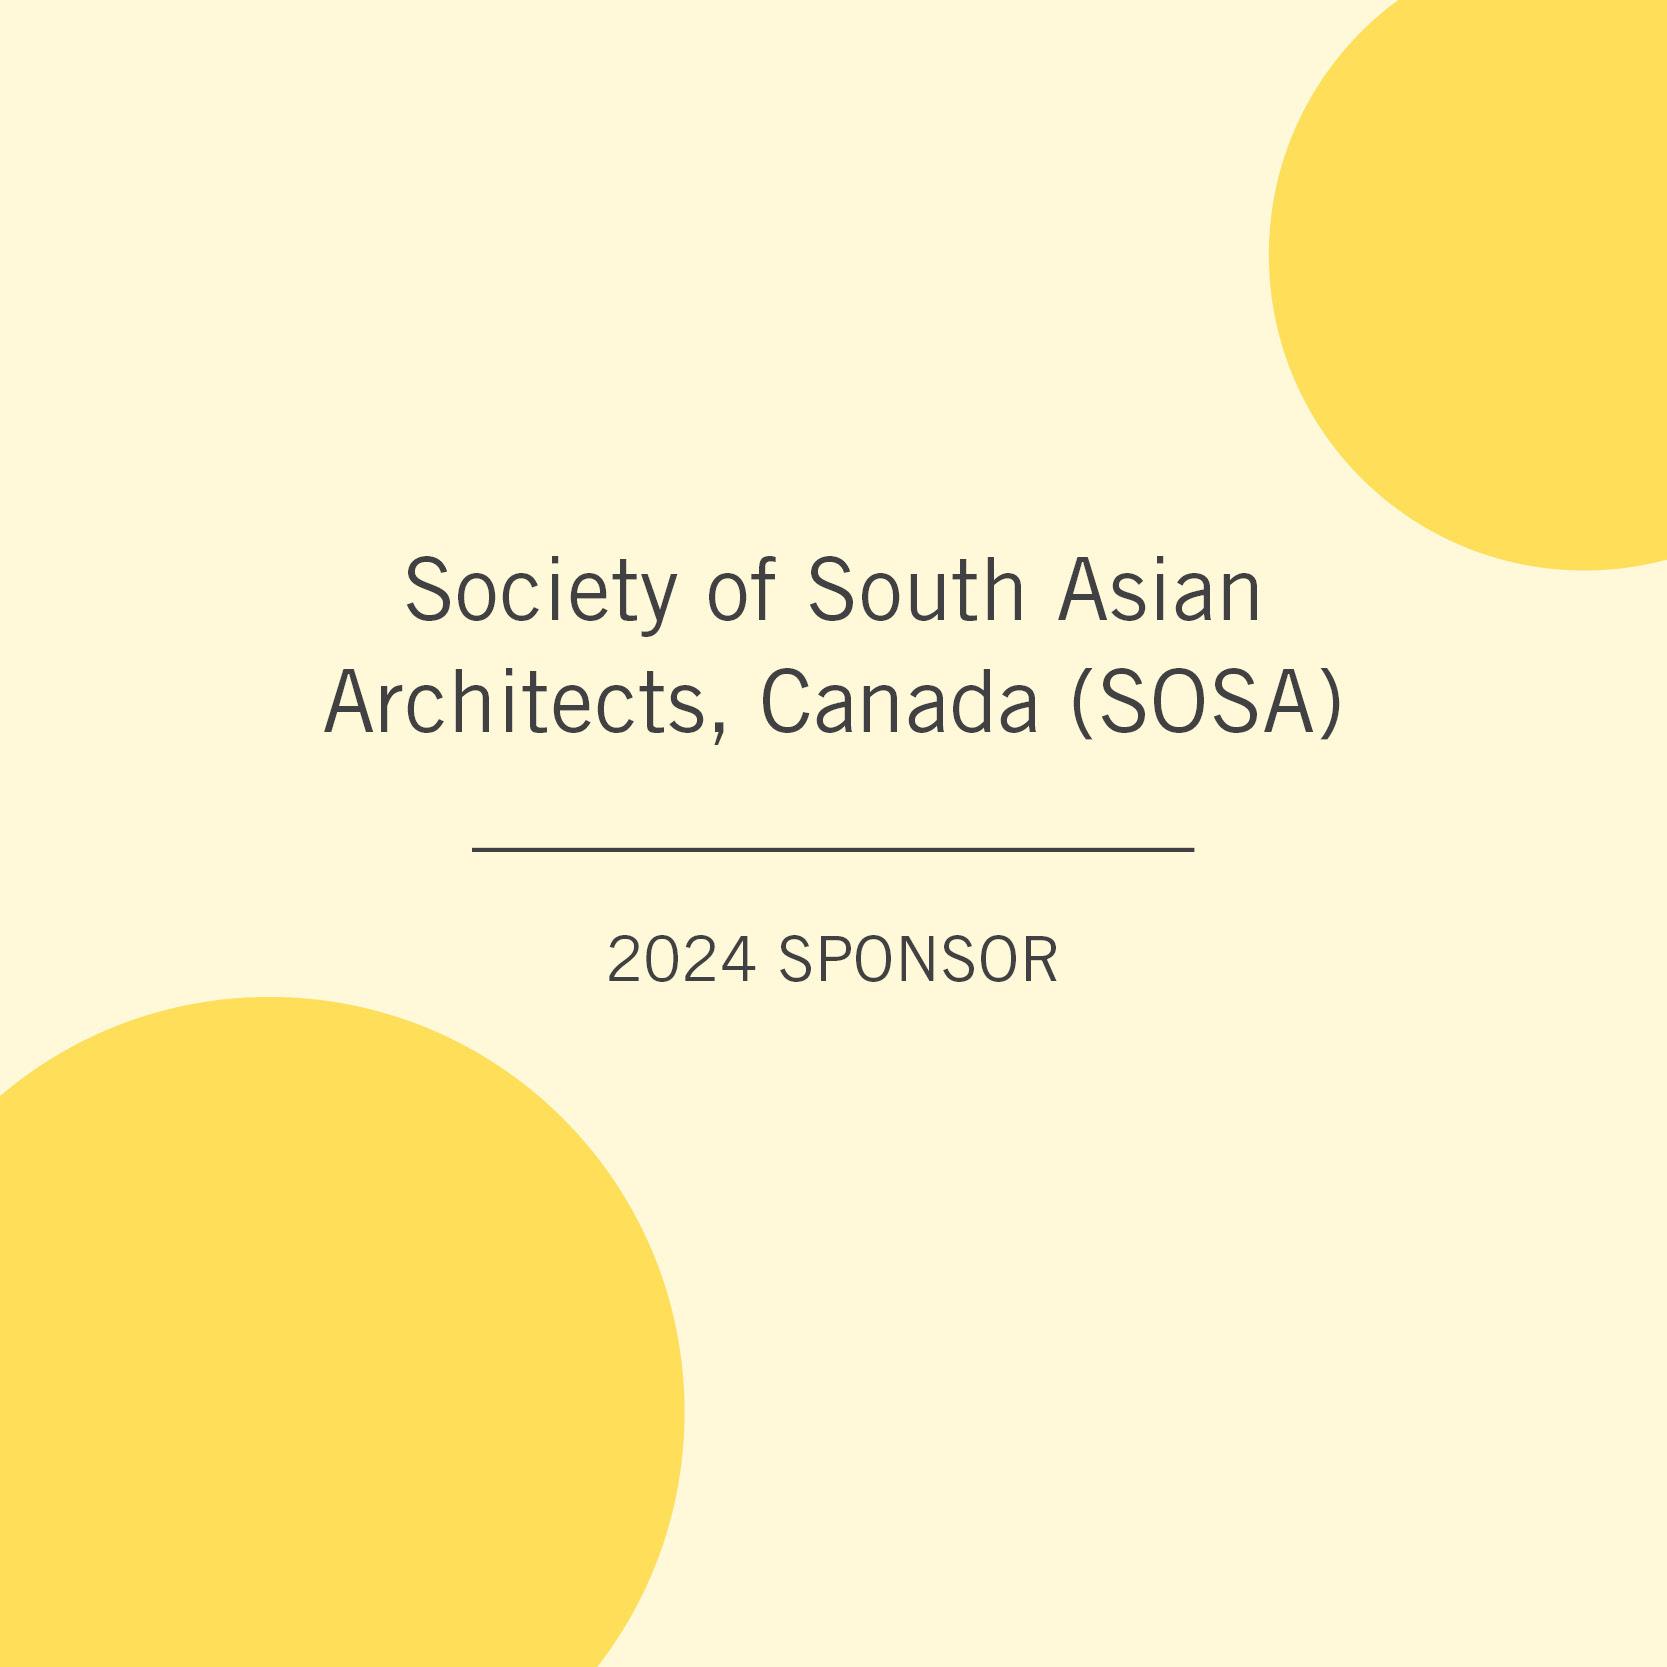 A49 Announces Sponsorship of Society of South Asian Architects, Canada